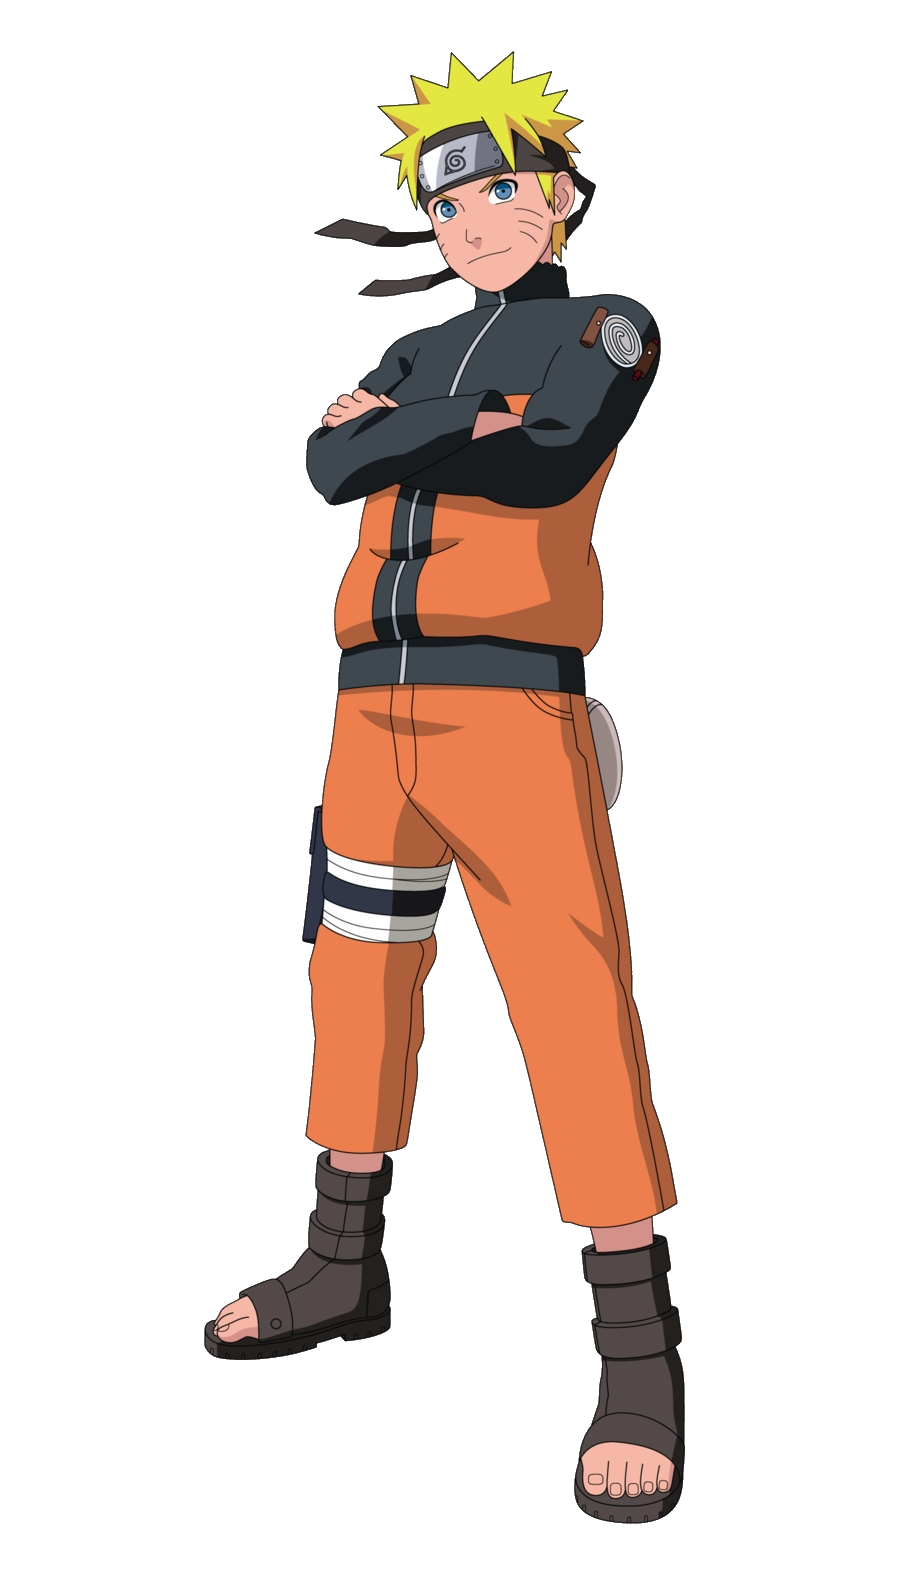 Naruto Posts on X: NARUTO TOP 99 a worldwide characters popularity poll  featuring all Naruto characters was announced The Number 1 characters will  receive a Special Short manga drawn by Masashi Kishimoto